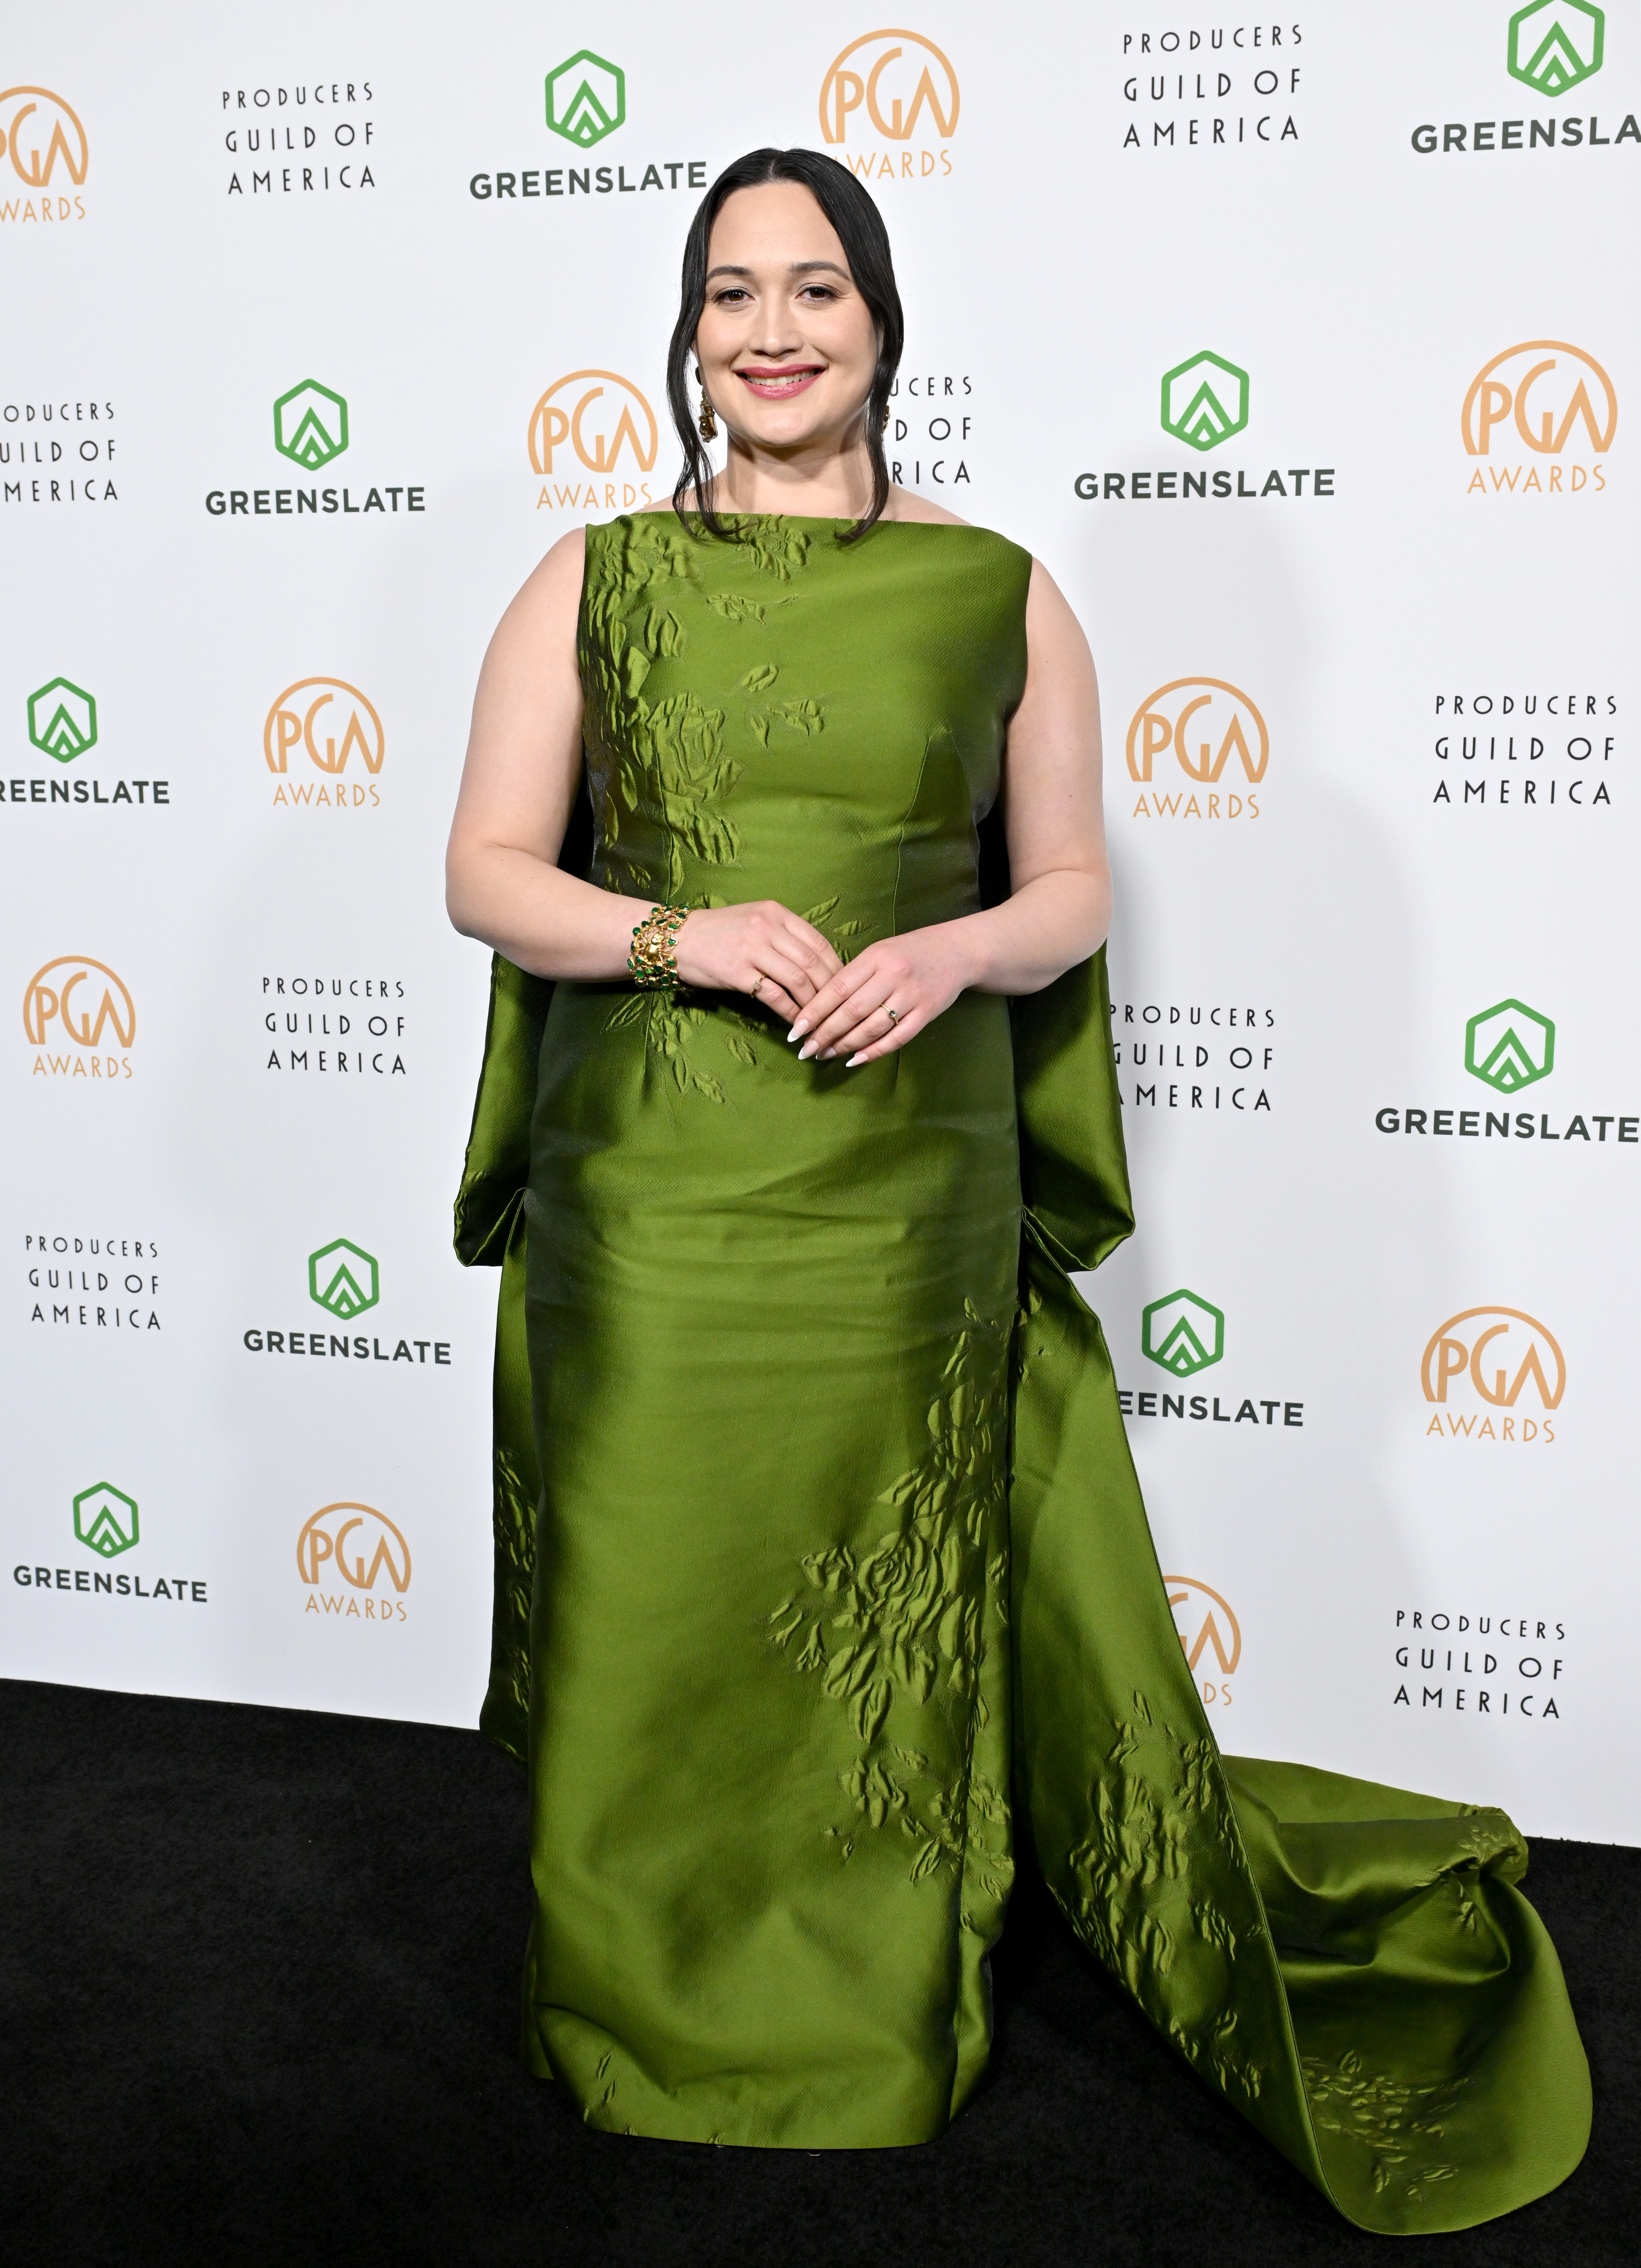 Lily in an elegant gown with leaf-like textures poses on the Producers Guild Awards red carpet